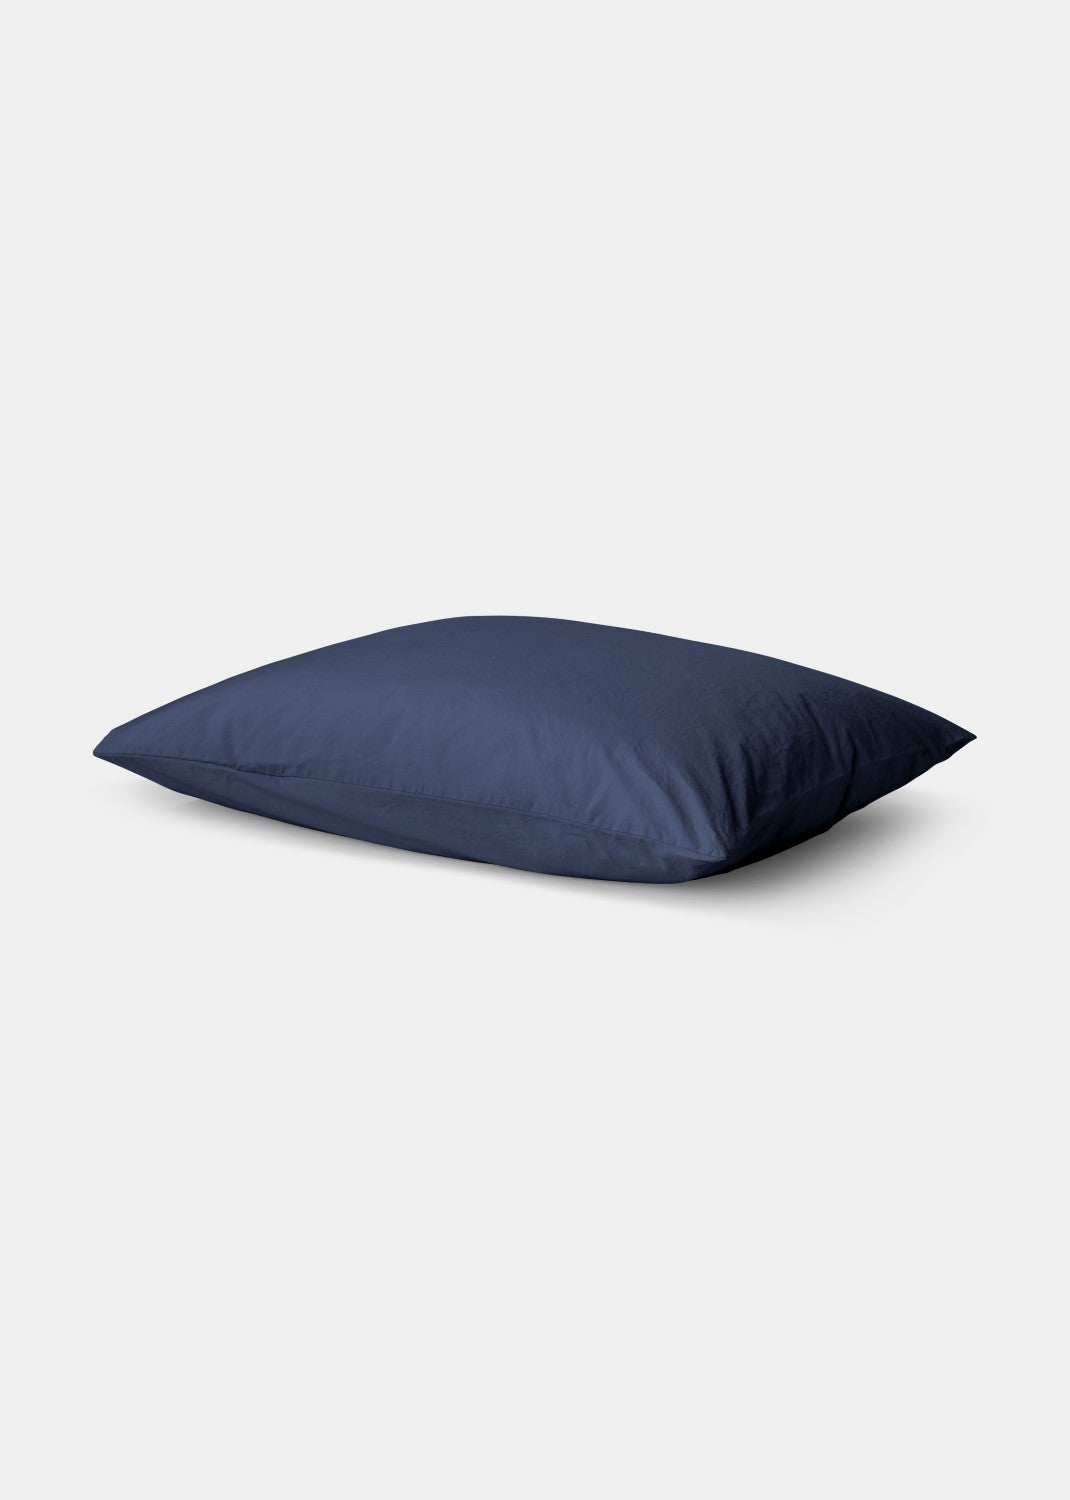 Cotton percale bed set - Navy blue